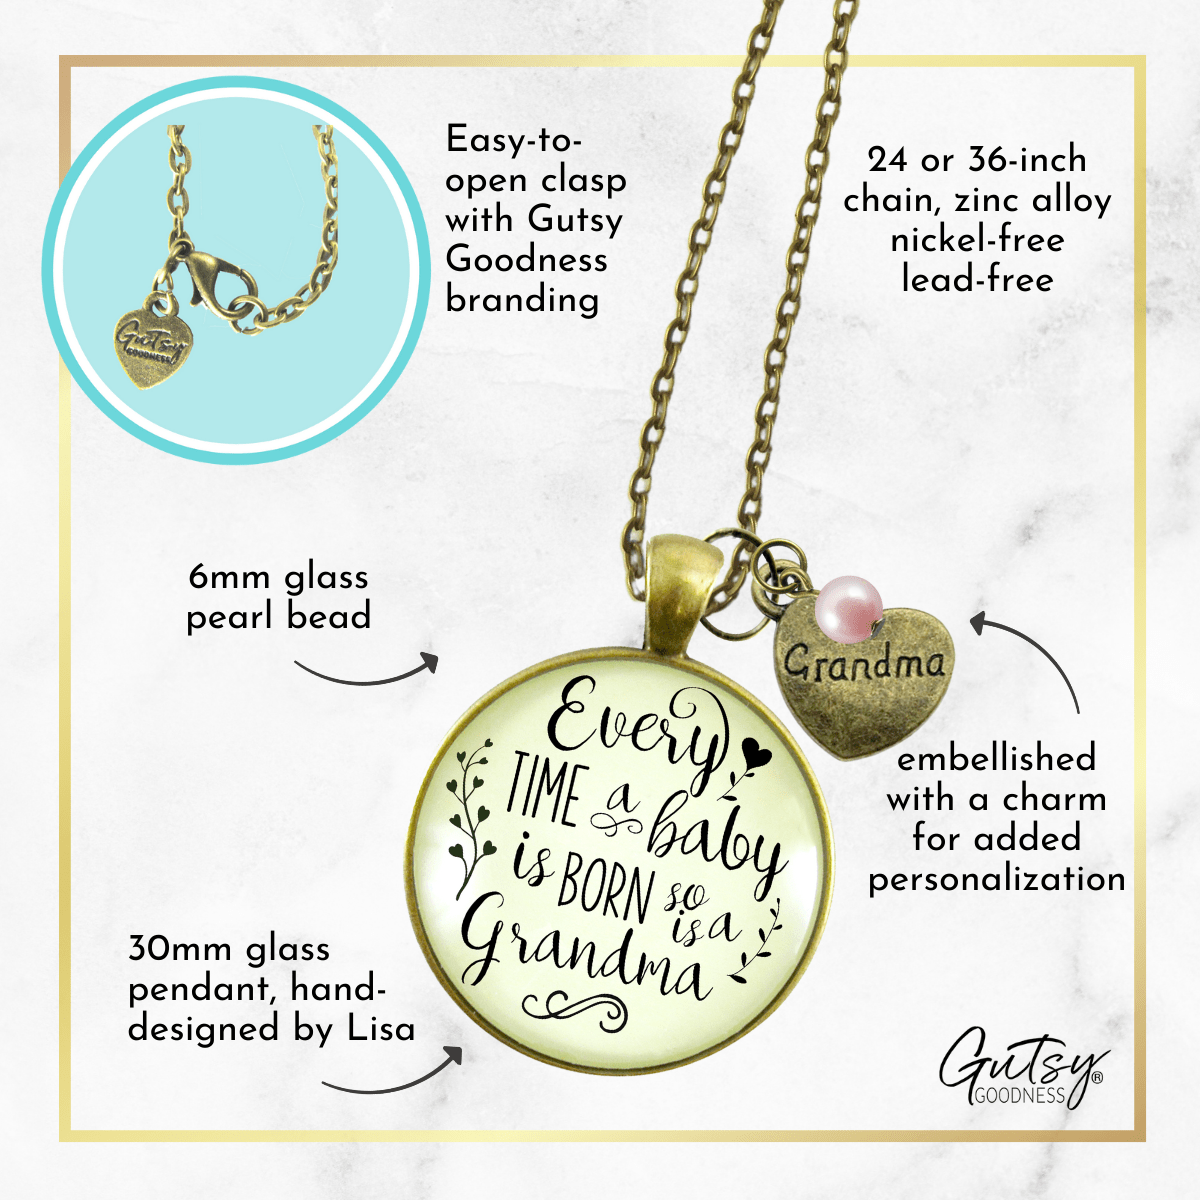 Gutsy Goodness Baby Gender Reveal Necklace Grandchild Born So is Grandma Gift - Gutsy Goodness Handmade Jewelry;Baby Gender Reveal Necklace Grandchild Born So Is Grandma Gift - Gutsy Goodness Handmade Jewelry Gifts